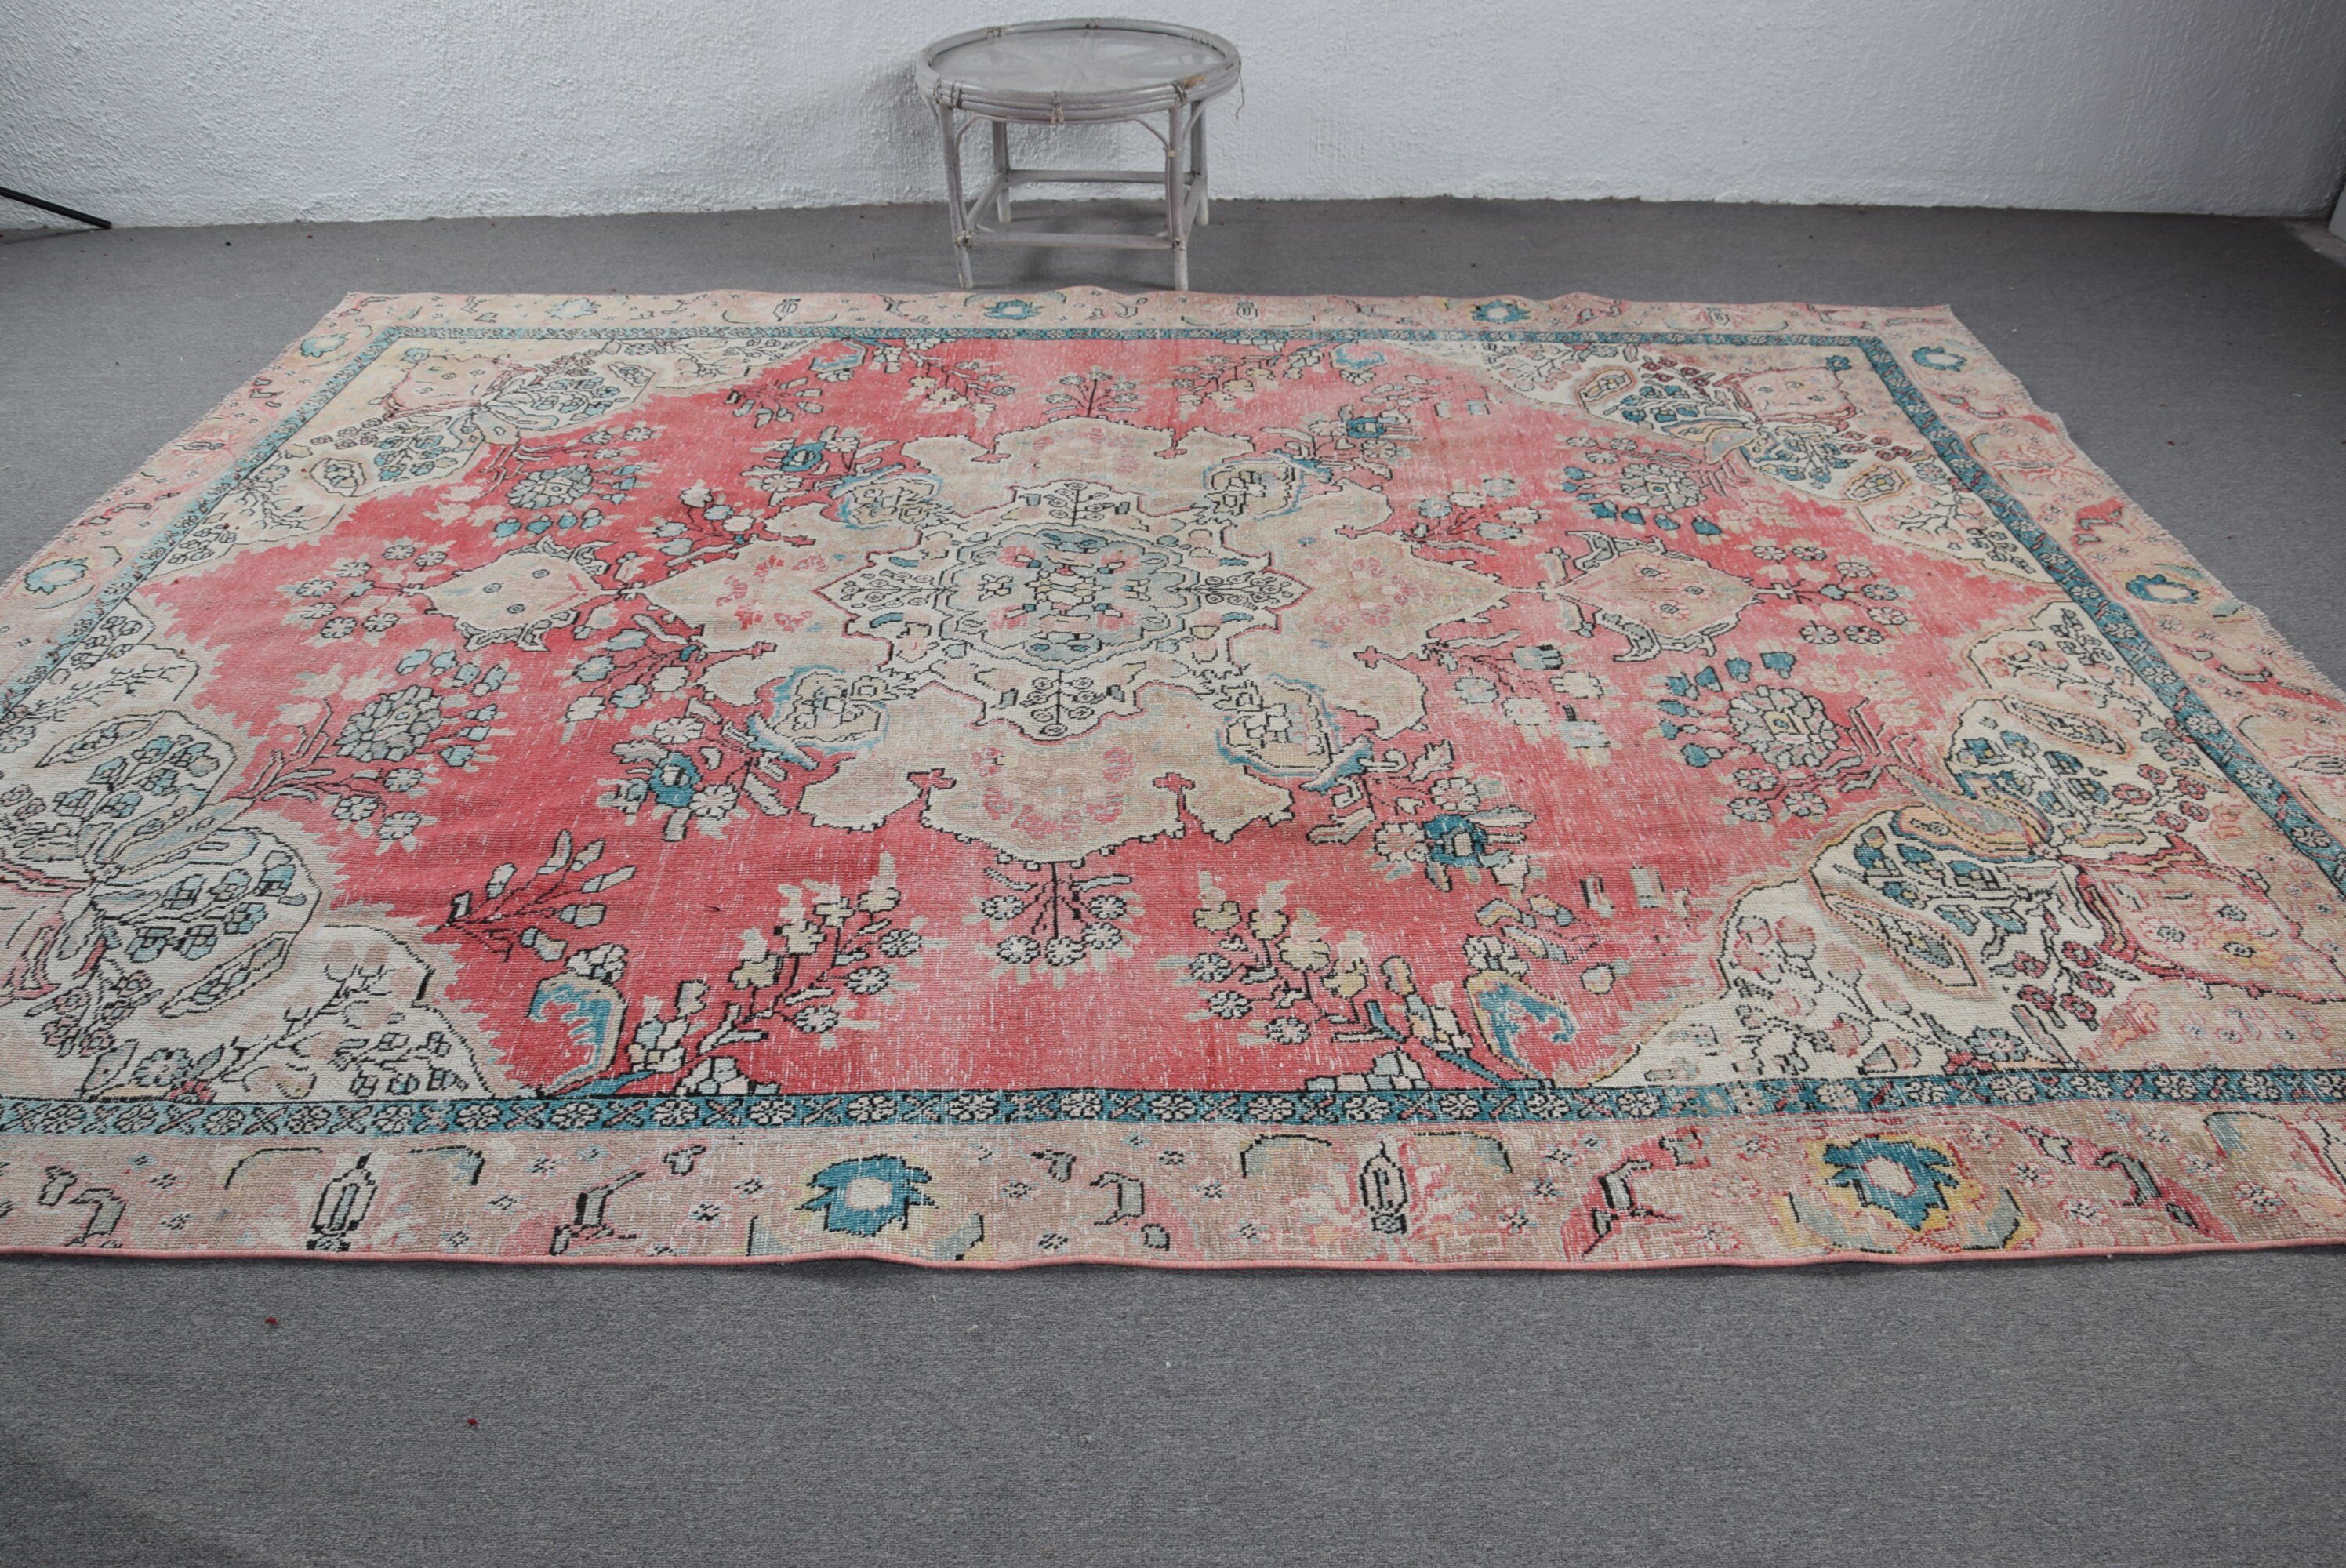 Salon Rugs, Eclectic Rugs, 9x11.9 ft Oversize Rug, Kitchen Rugs, Turkish Rugs, Red Anatolian Rugs, Wool Rug, Living Room Rug, Vintage Rug